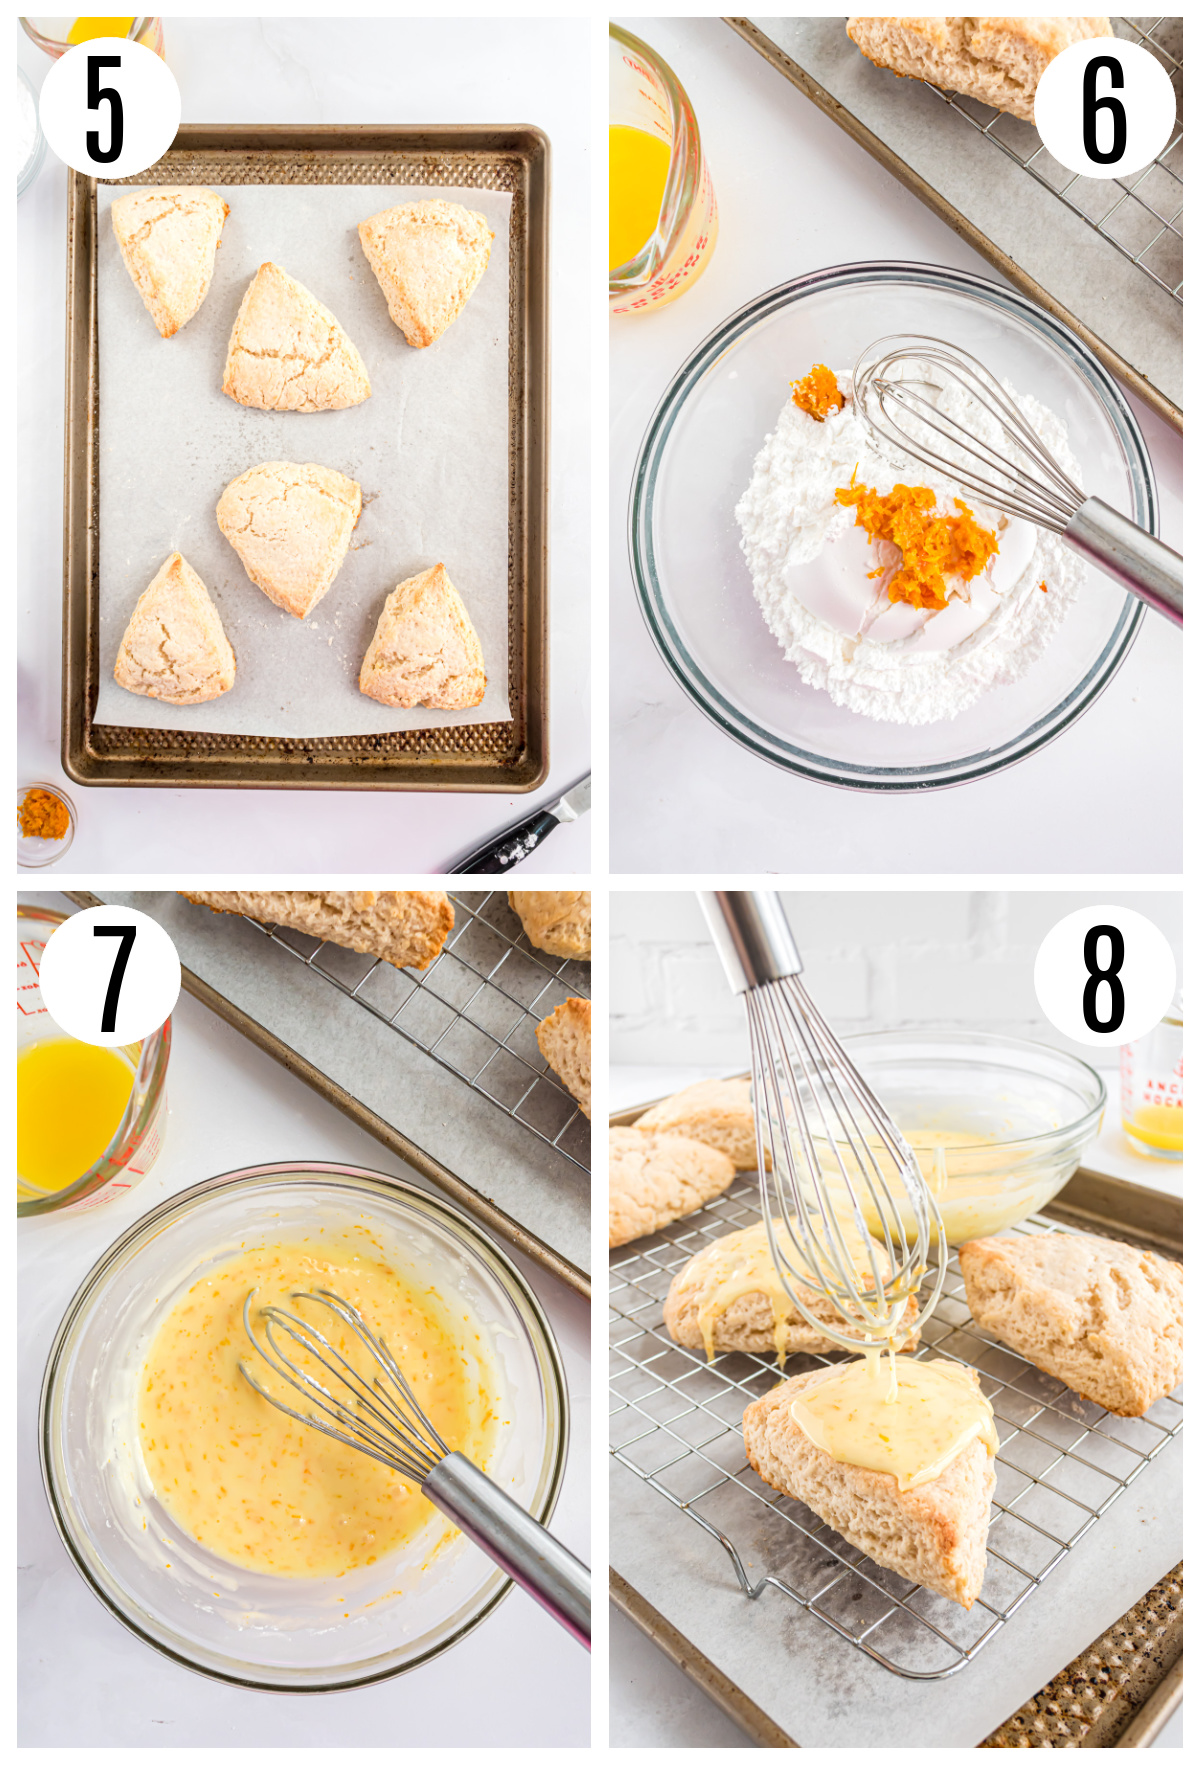 The next steps in making the orange scones include baking the scones, and making the glaze.